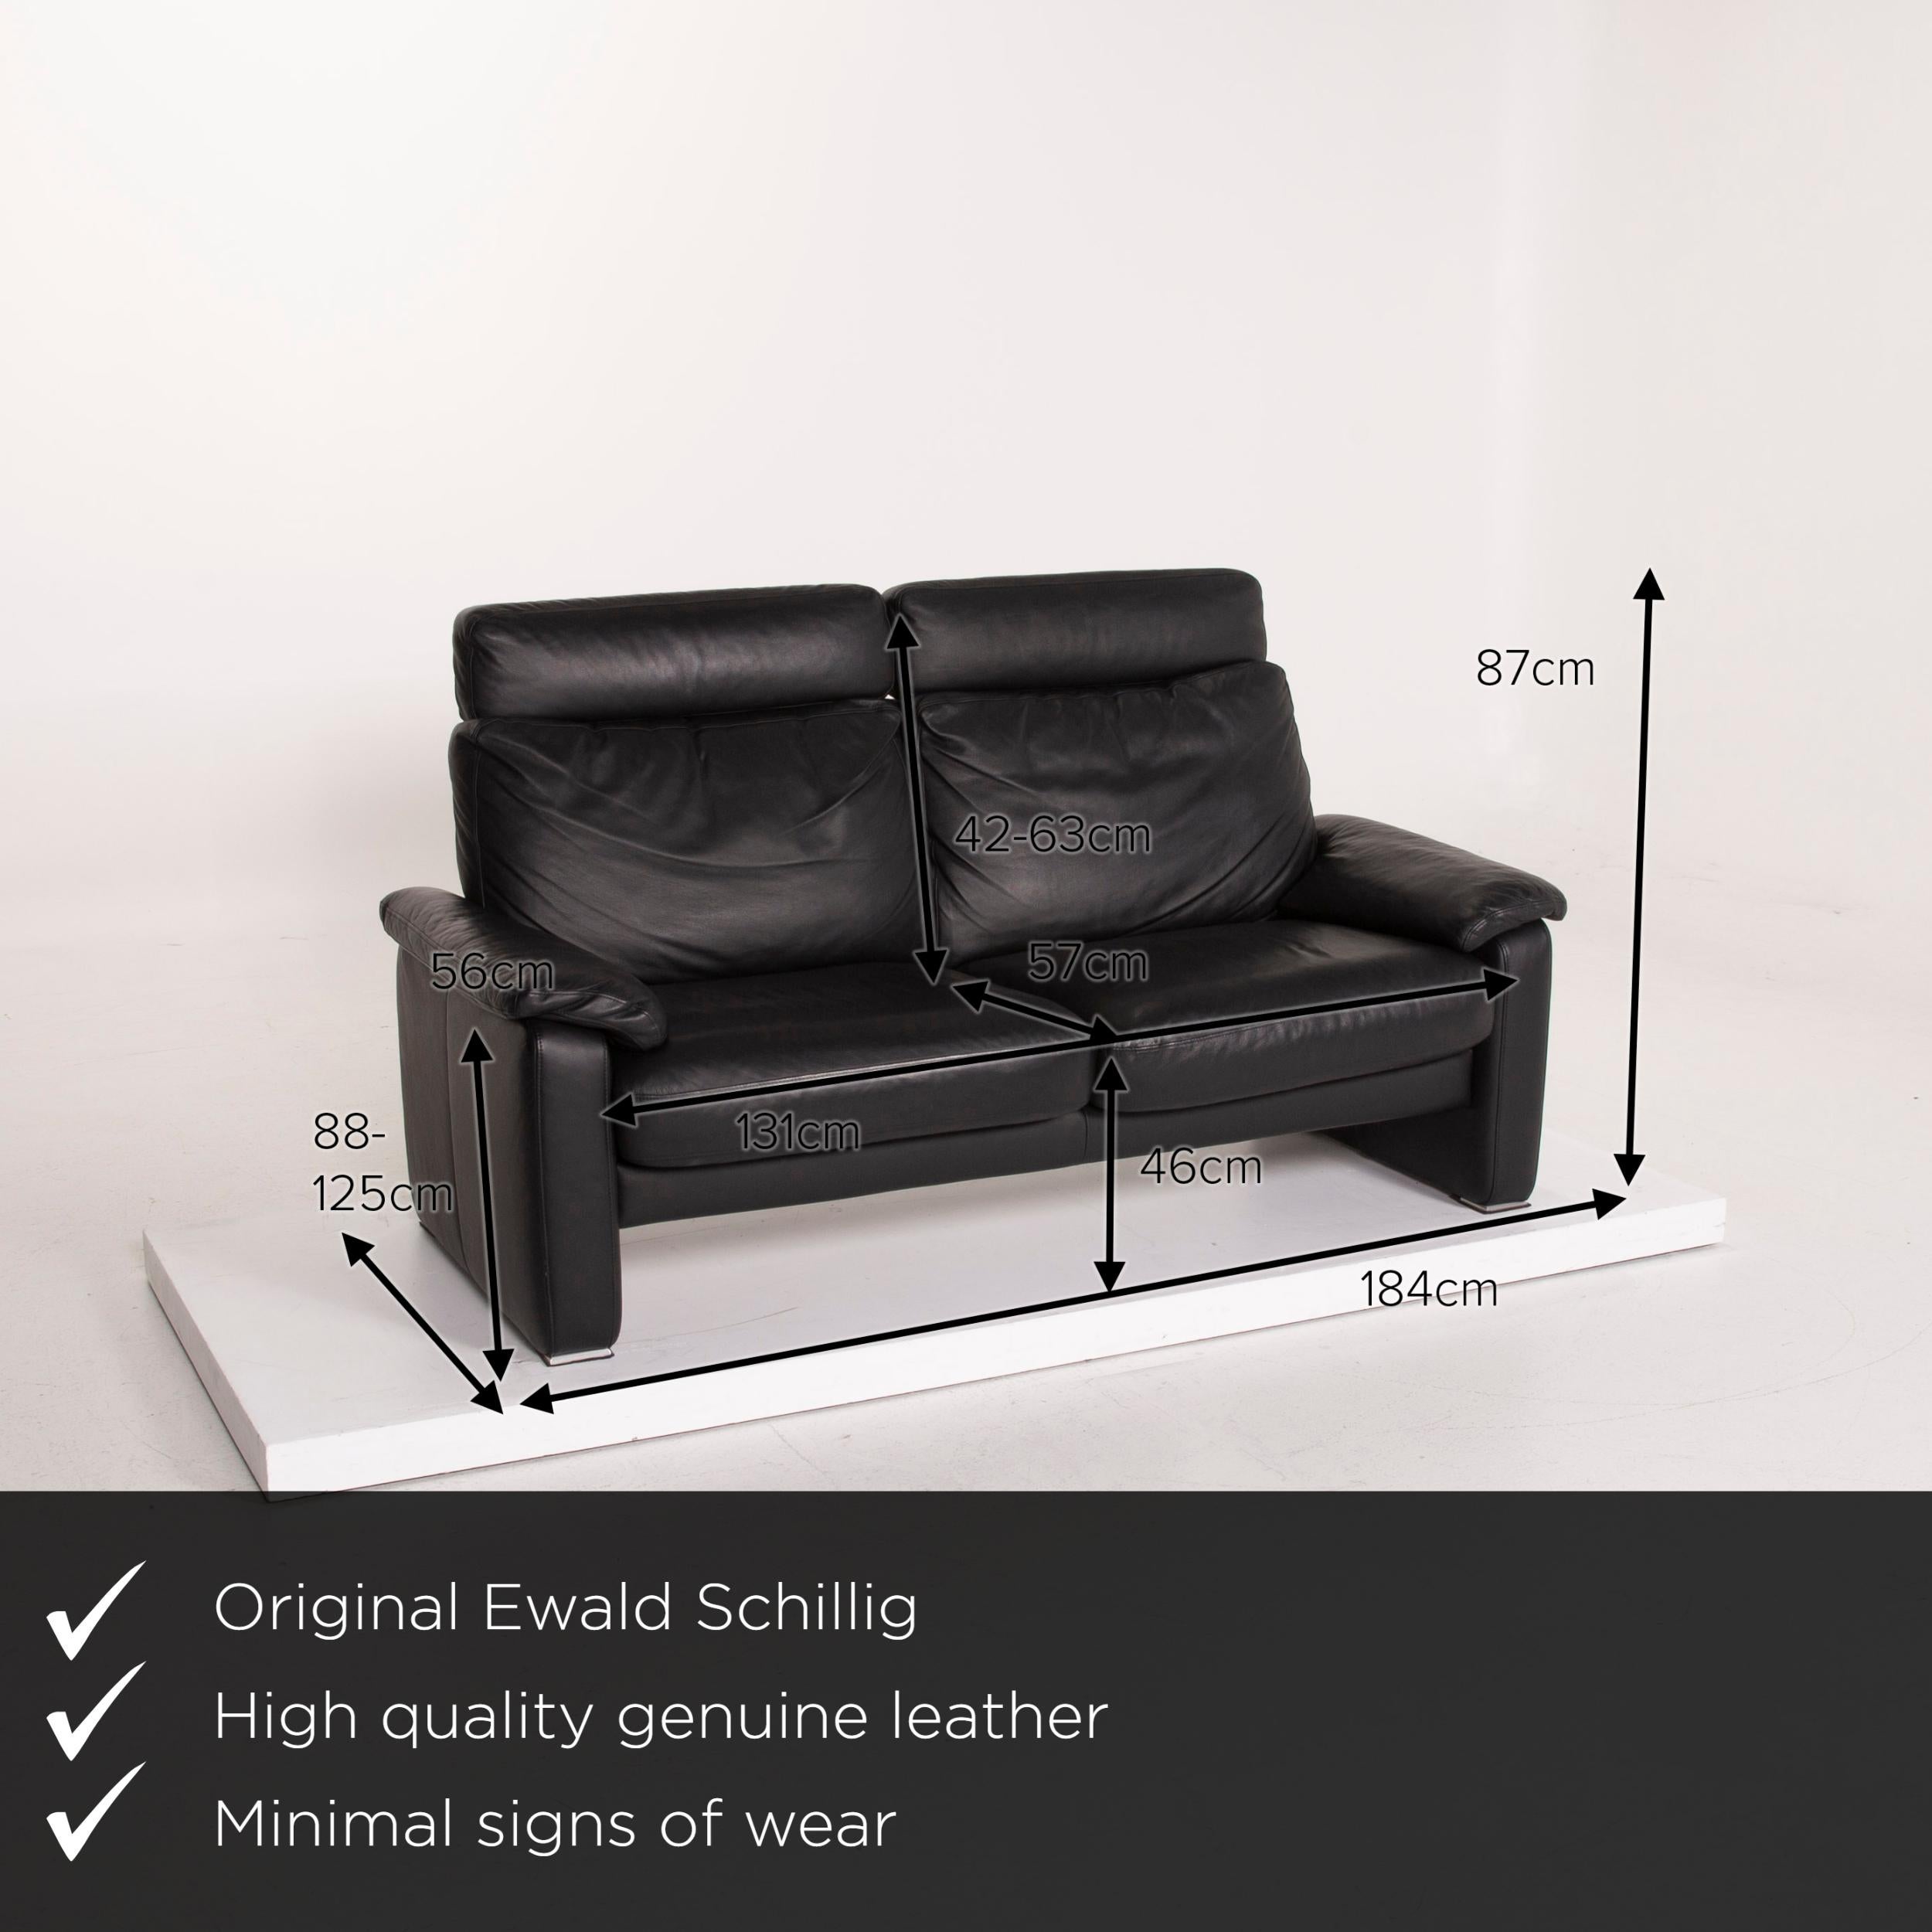 We present to you an Ewald Schillig leather sofa black two-seat.
 

 Product measurements in centimeters:
 

Depth 88
Width 184
Height 166
Seat height 46
Rest height 56
Seat depth 57
Seat width 131
Back height 42.
 